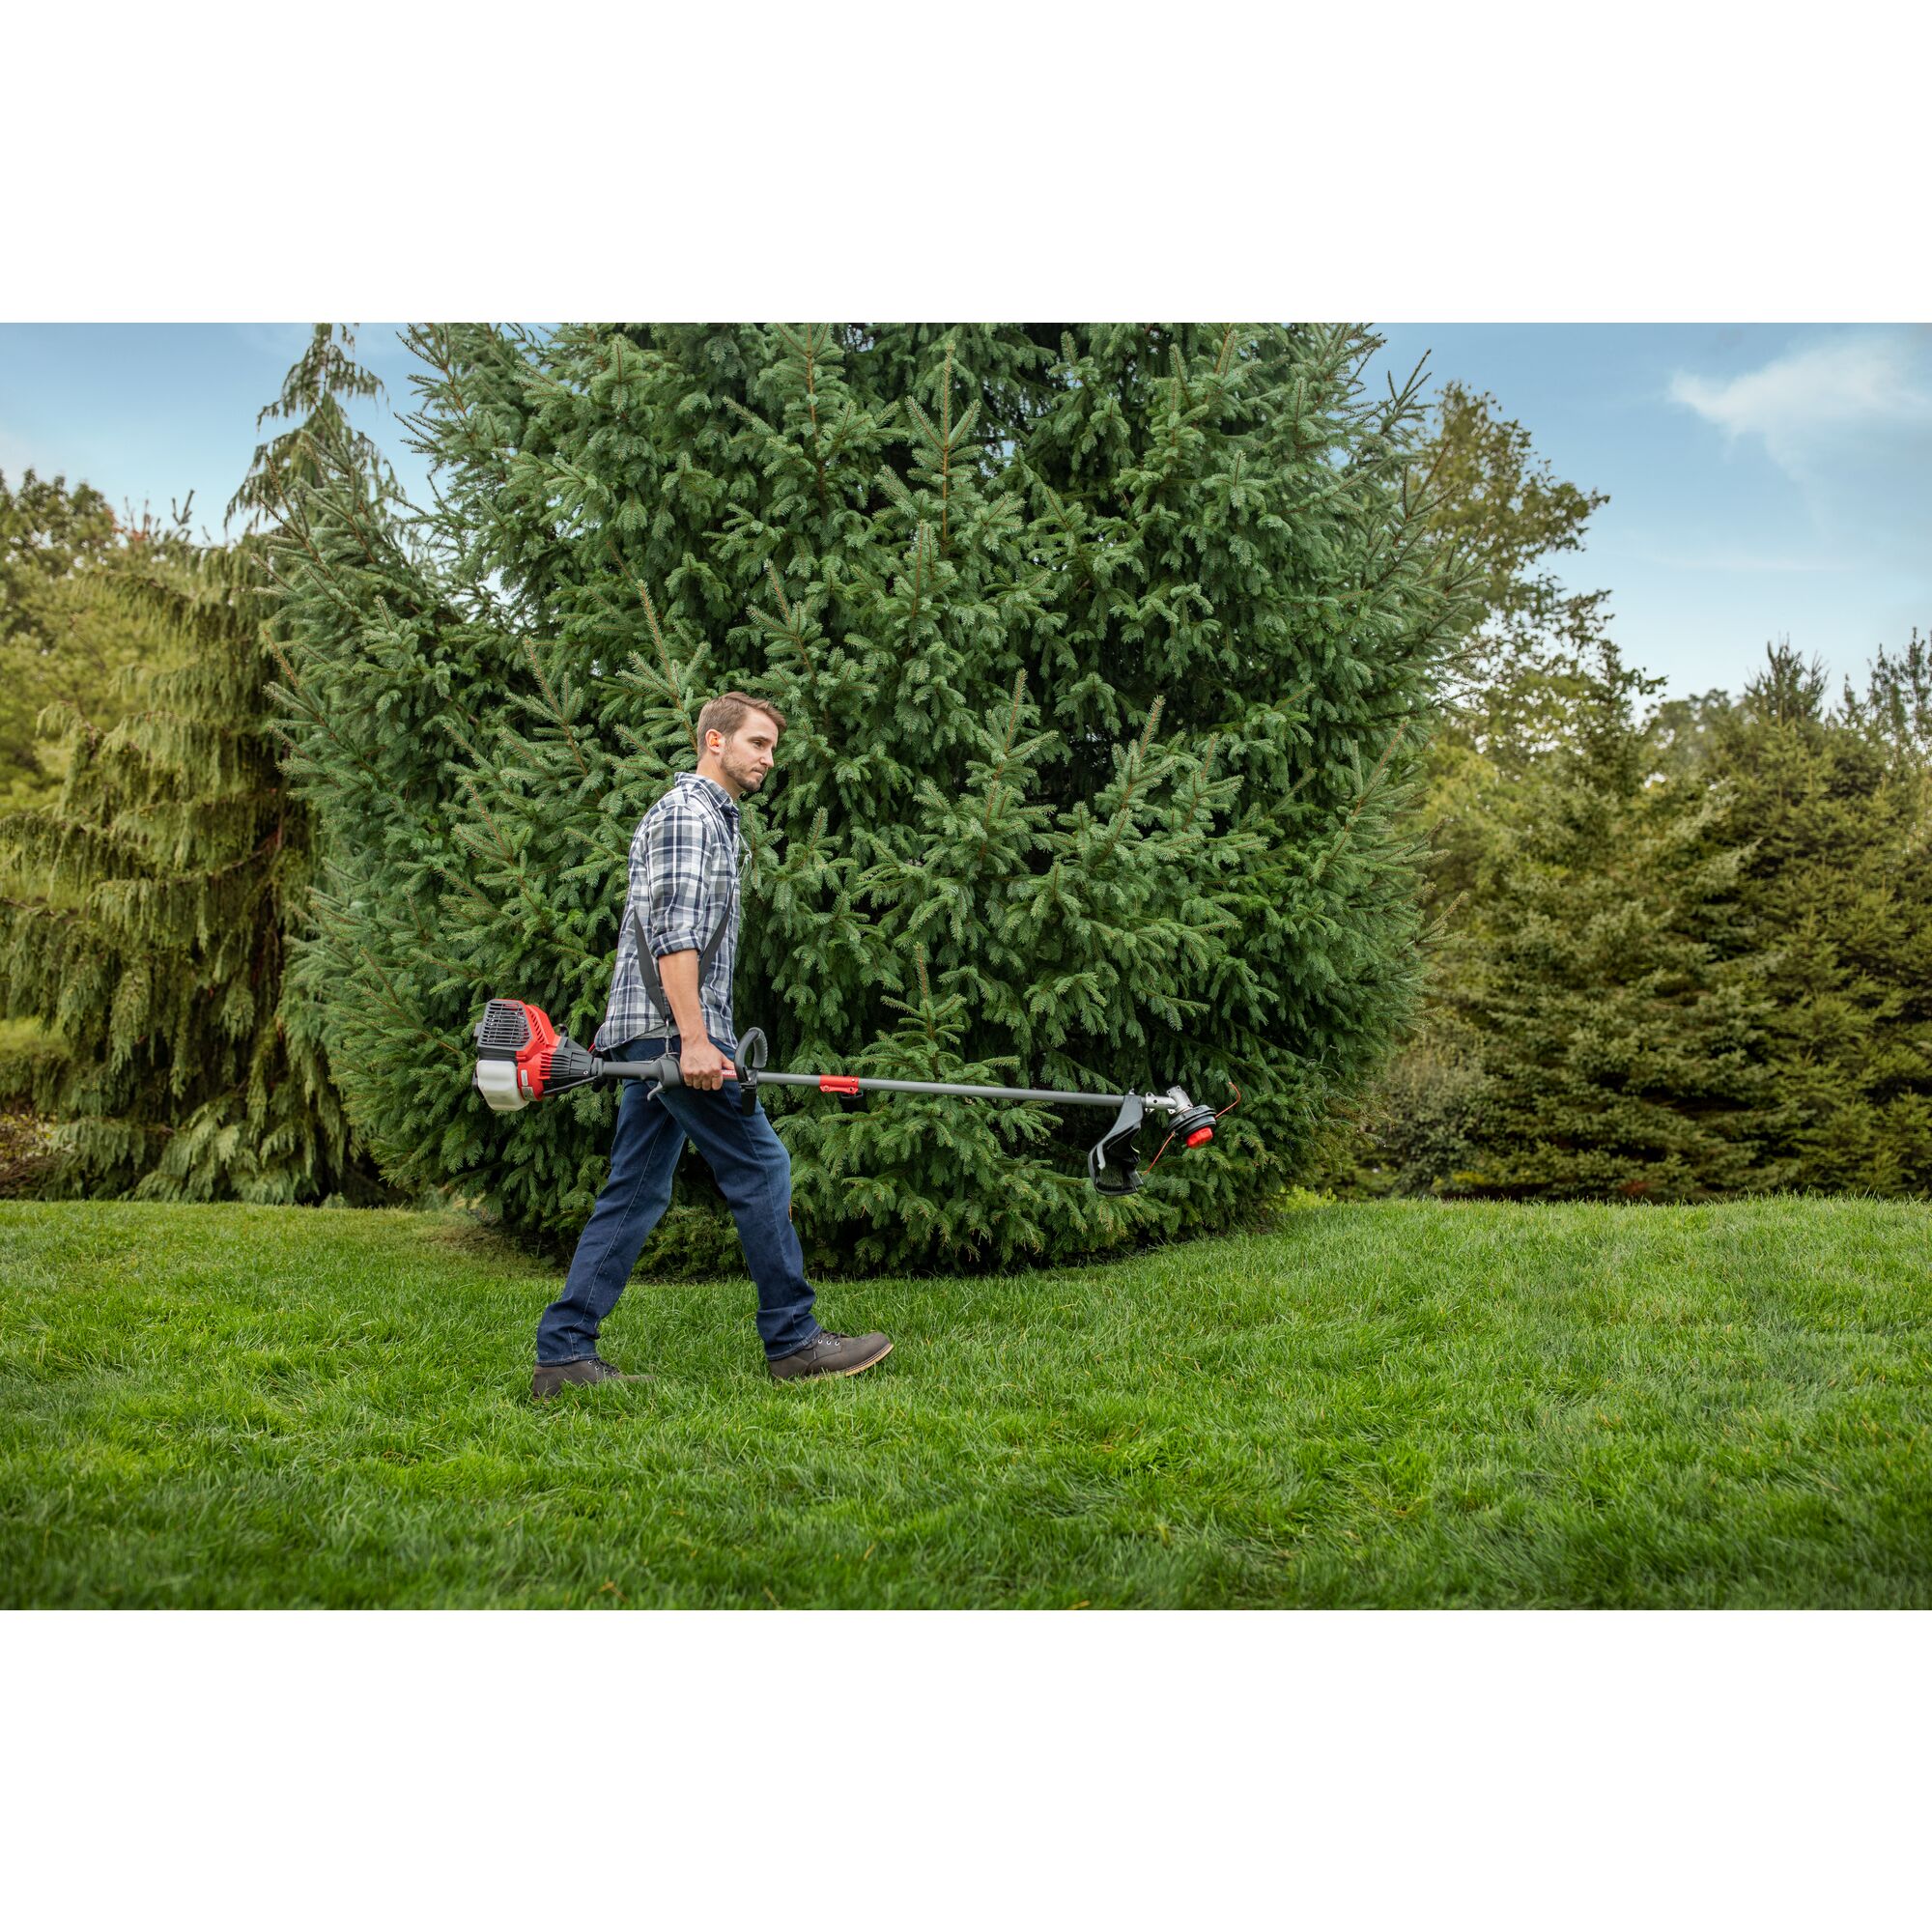 CRAFTSMAN WS4200 WEEDWACKER being carried across yard with plaid shirt